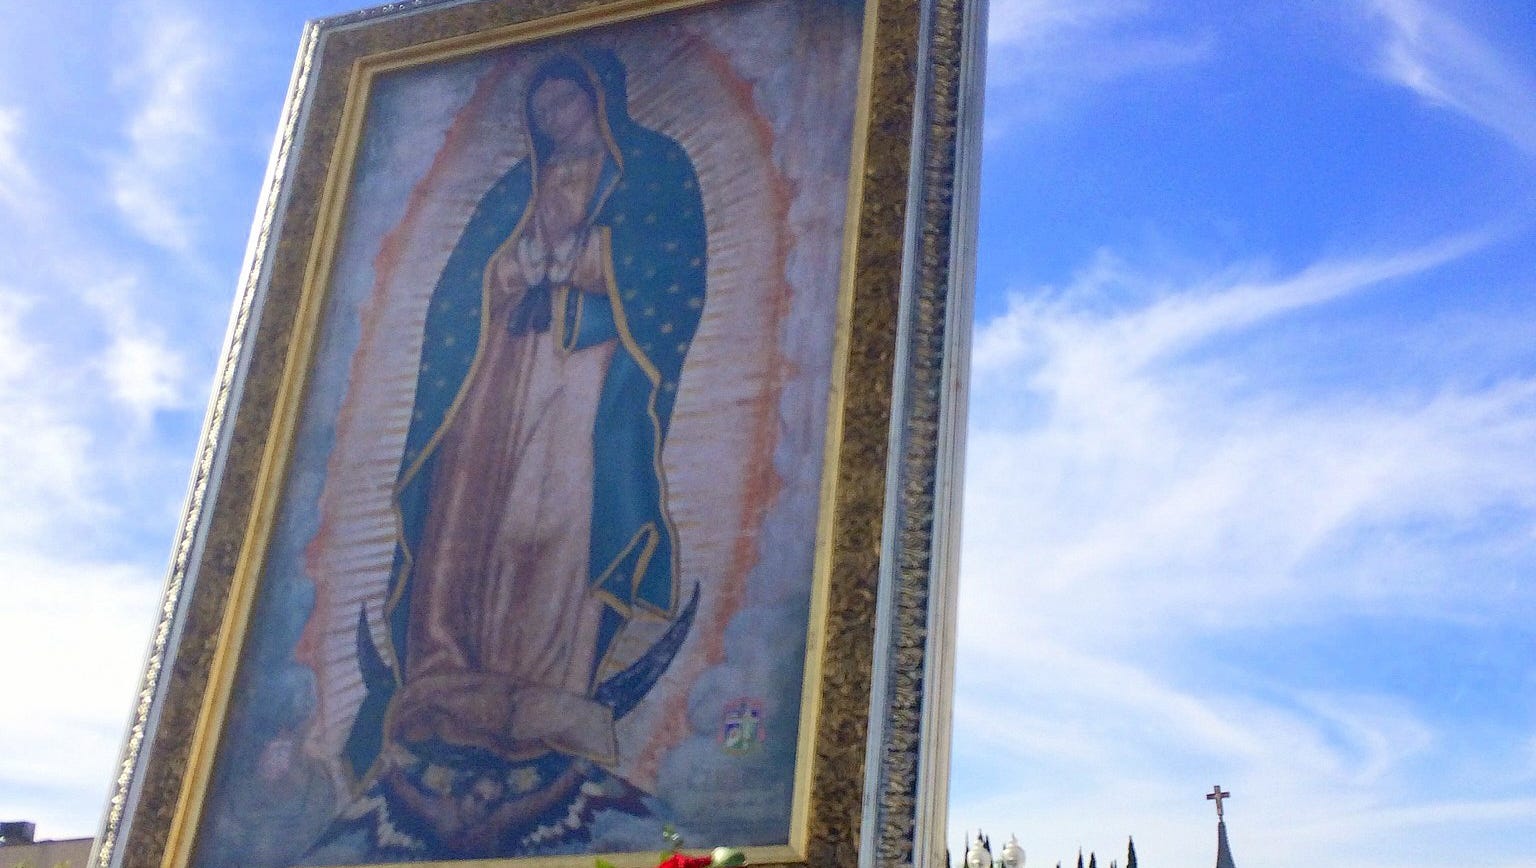 Sacred Our Lady image will visit Oxnard